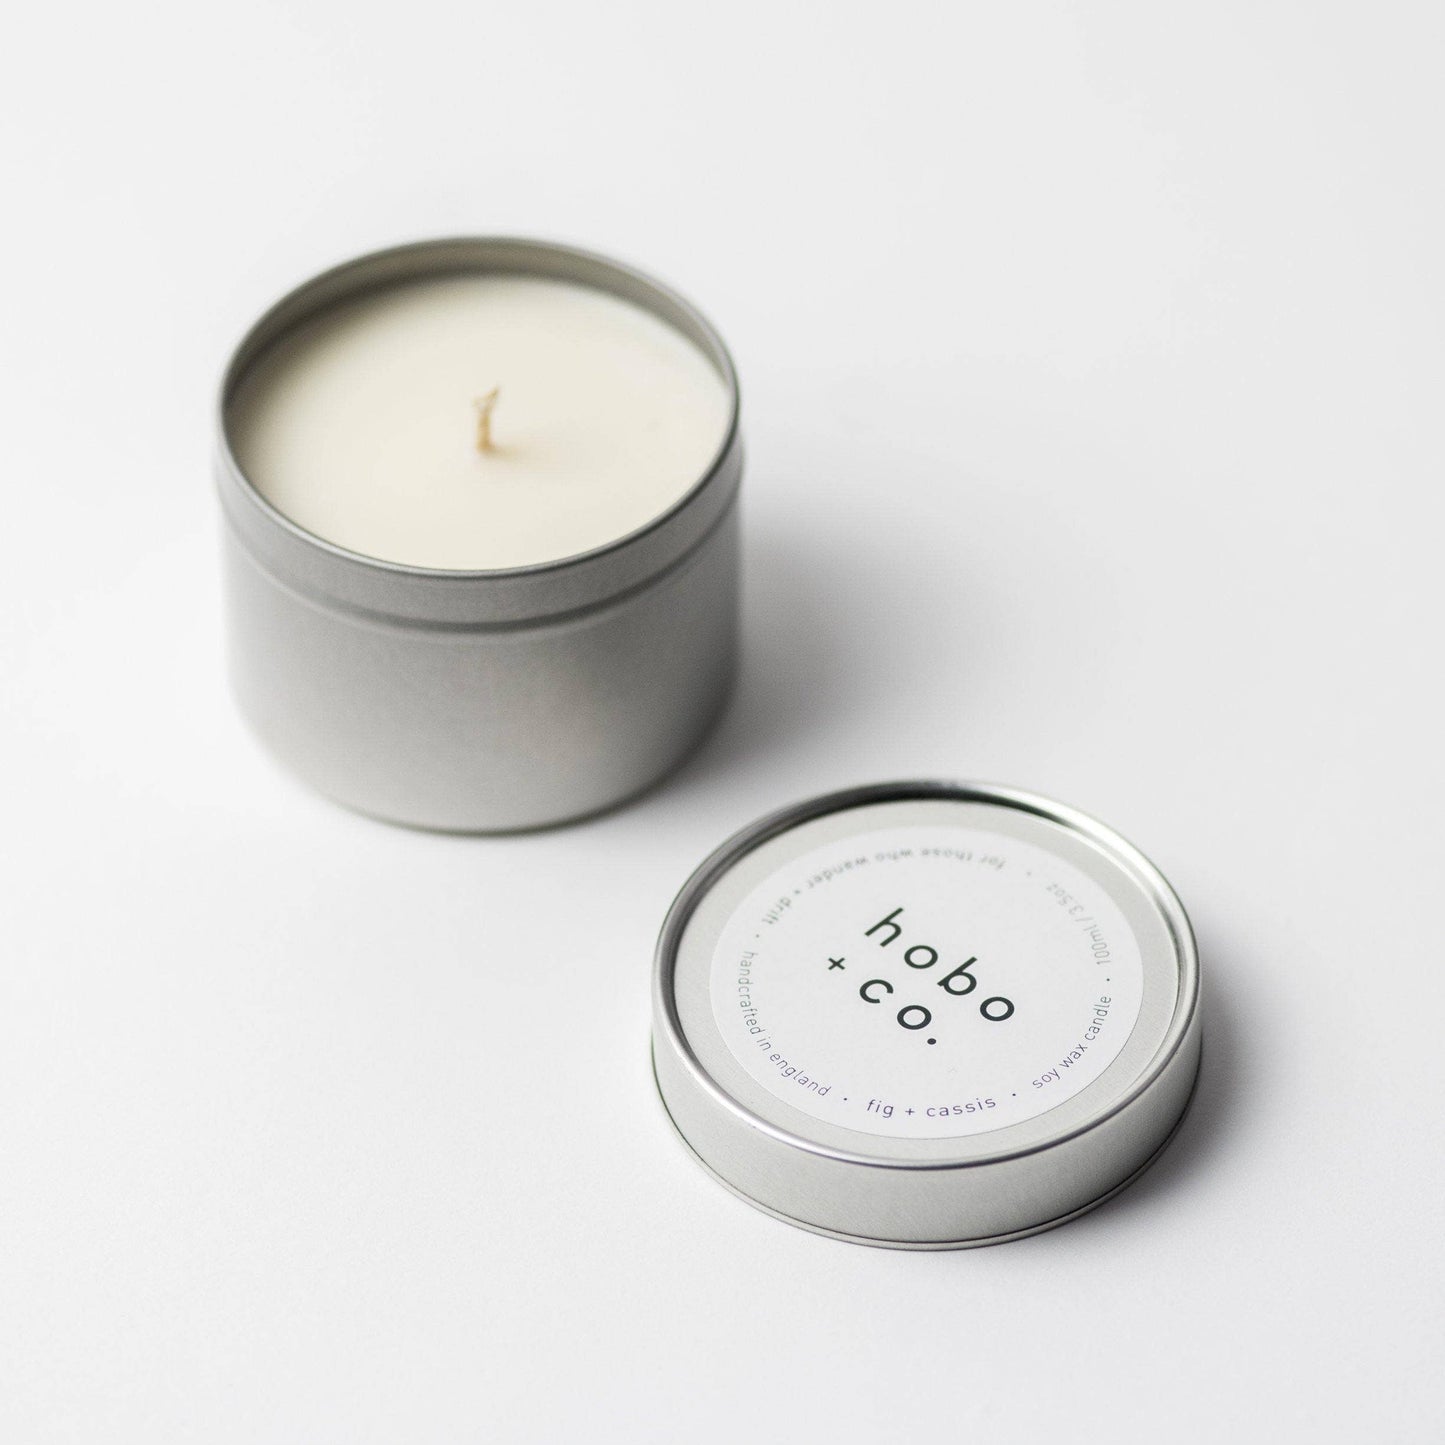 Hobo+Co Fig & Cassis Travel Tin Soy Wax Candle at Joetie Home Fragrance. Luxury Handmade Apothecary Soy Candles